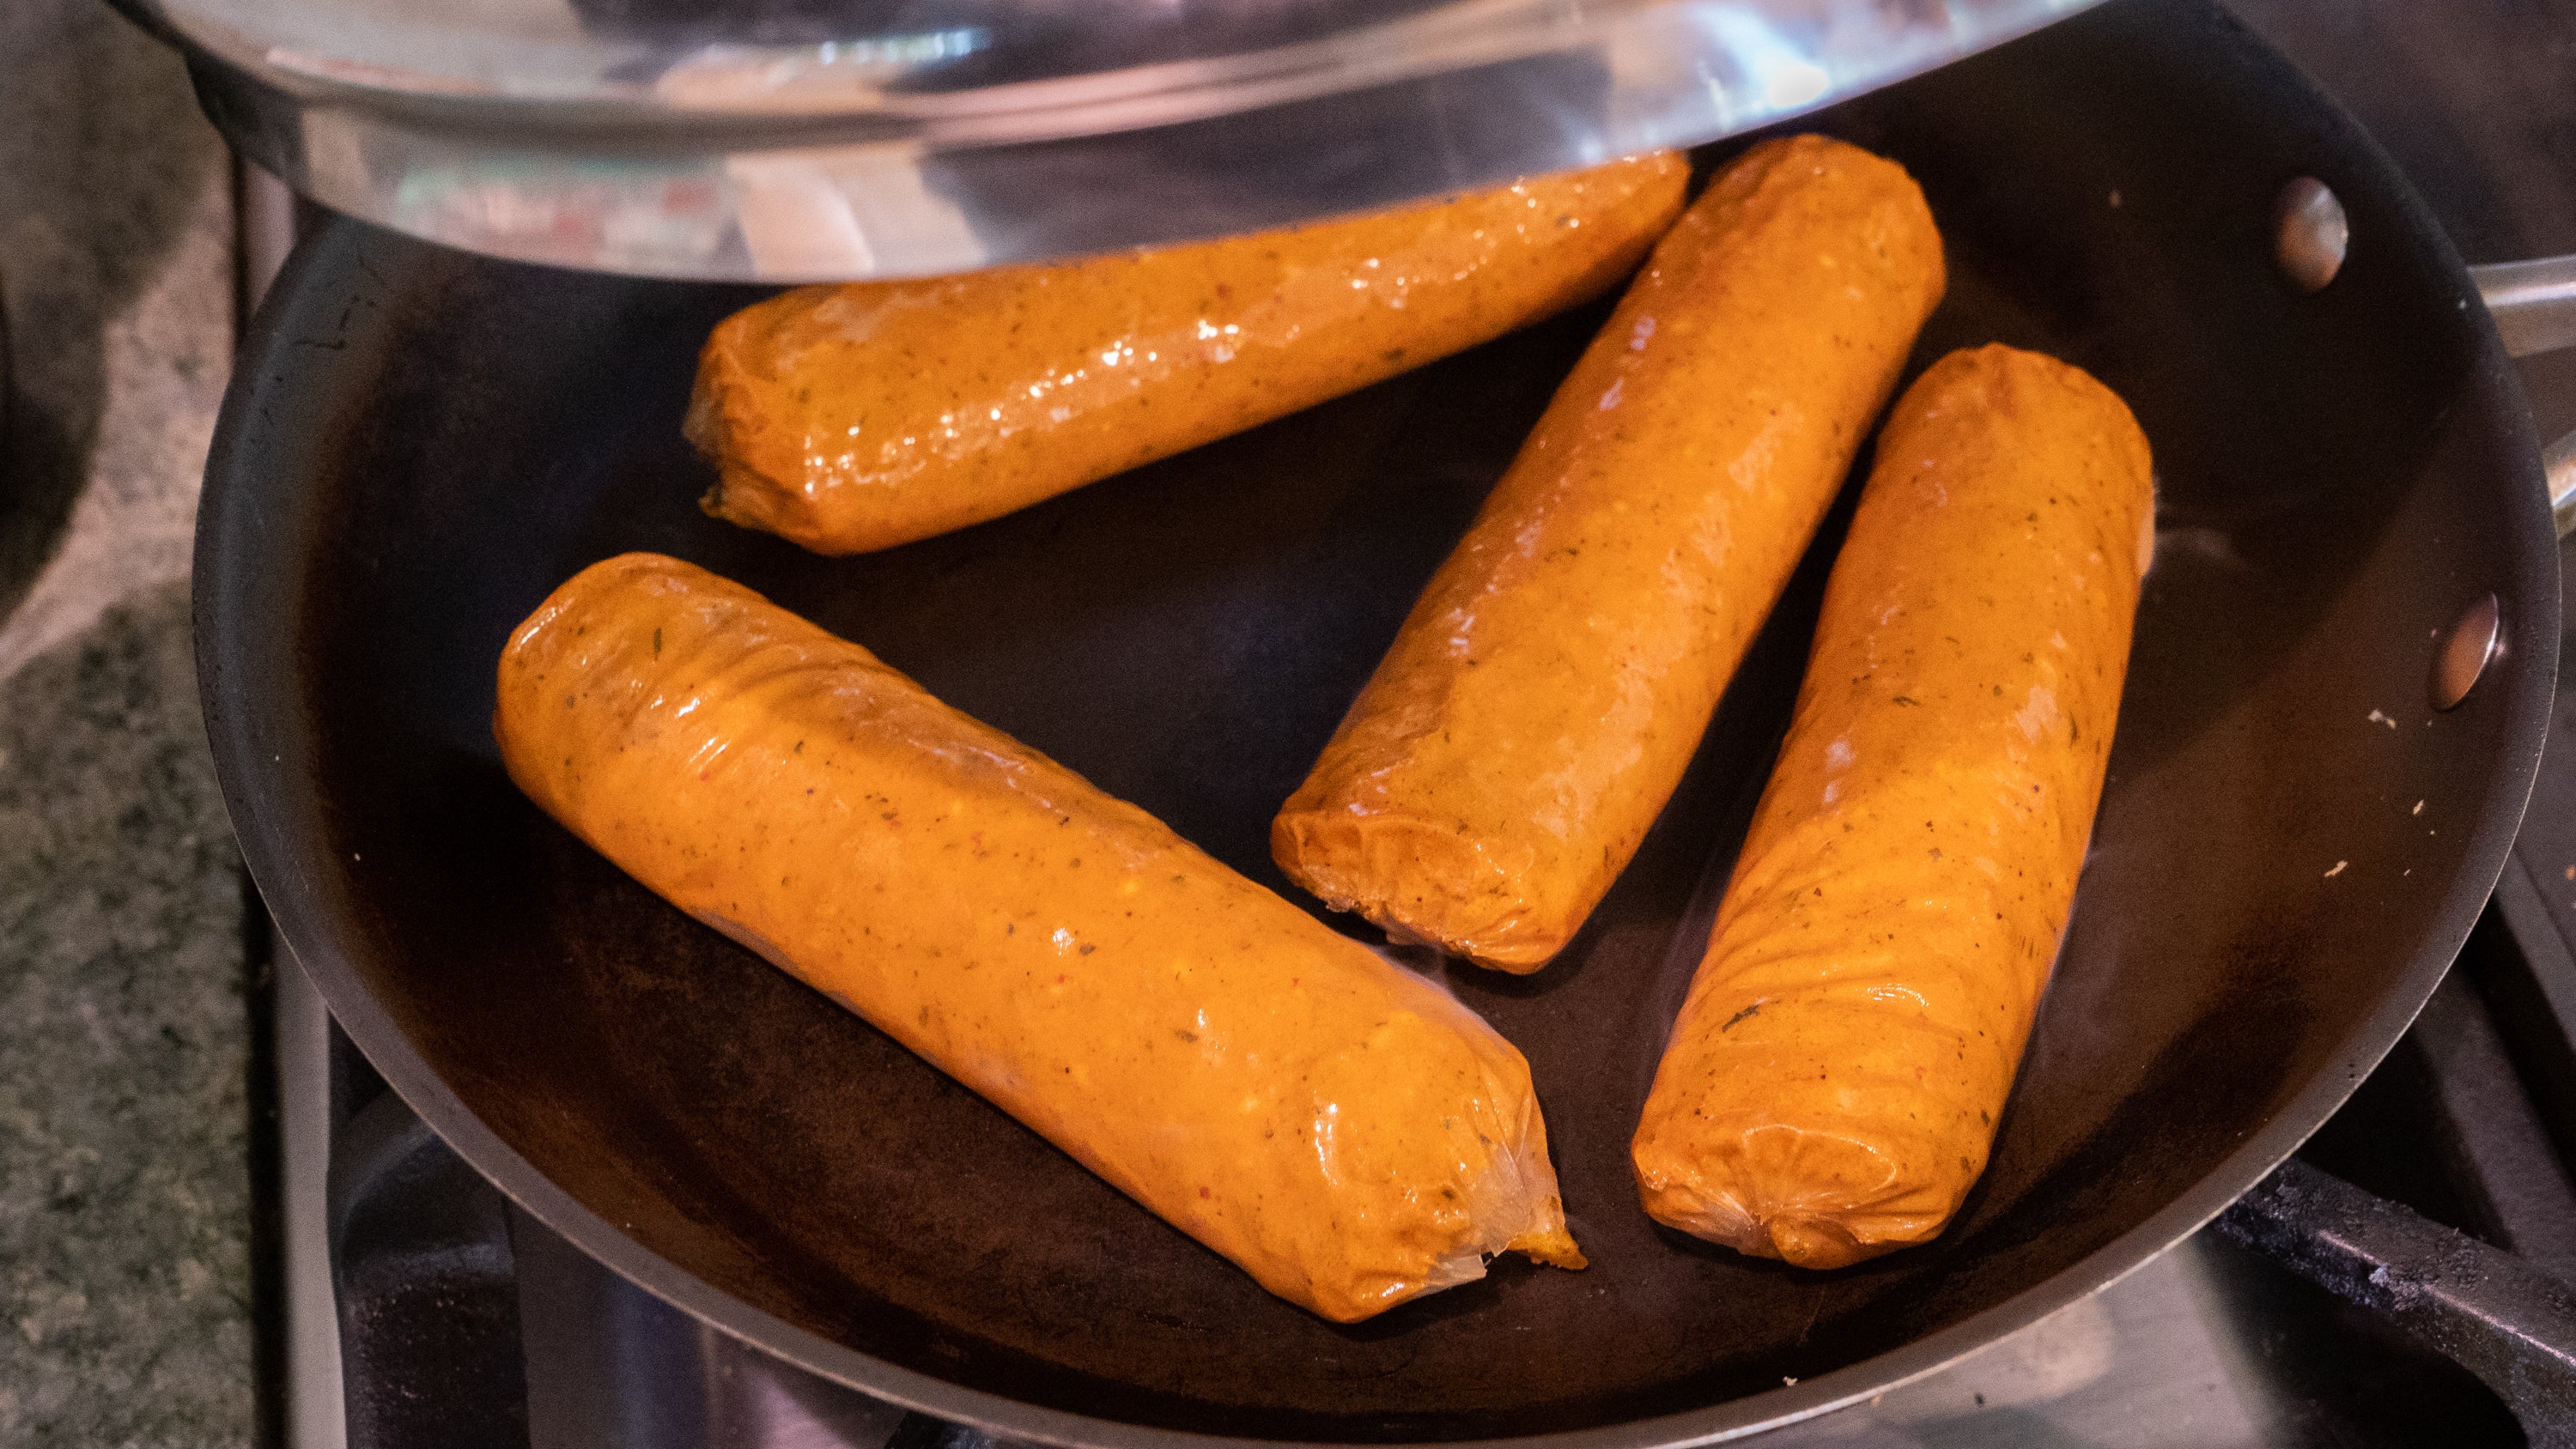 These lumpy veggie dogs look more appetizing once they're browned.  (Photo: Florence Ion / Gizmodo)